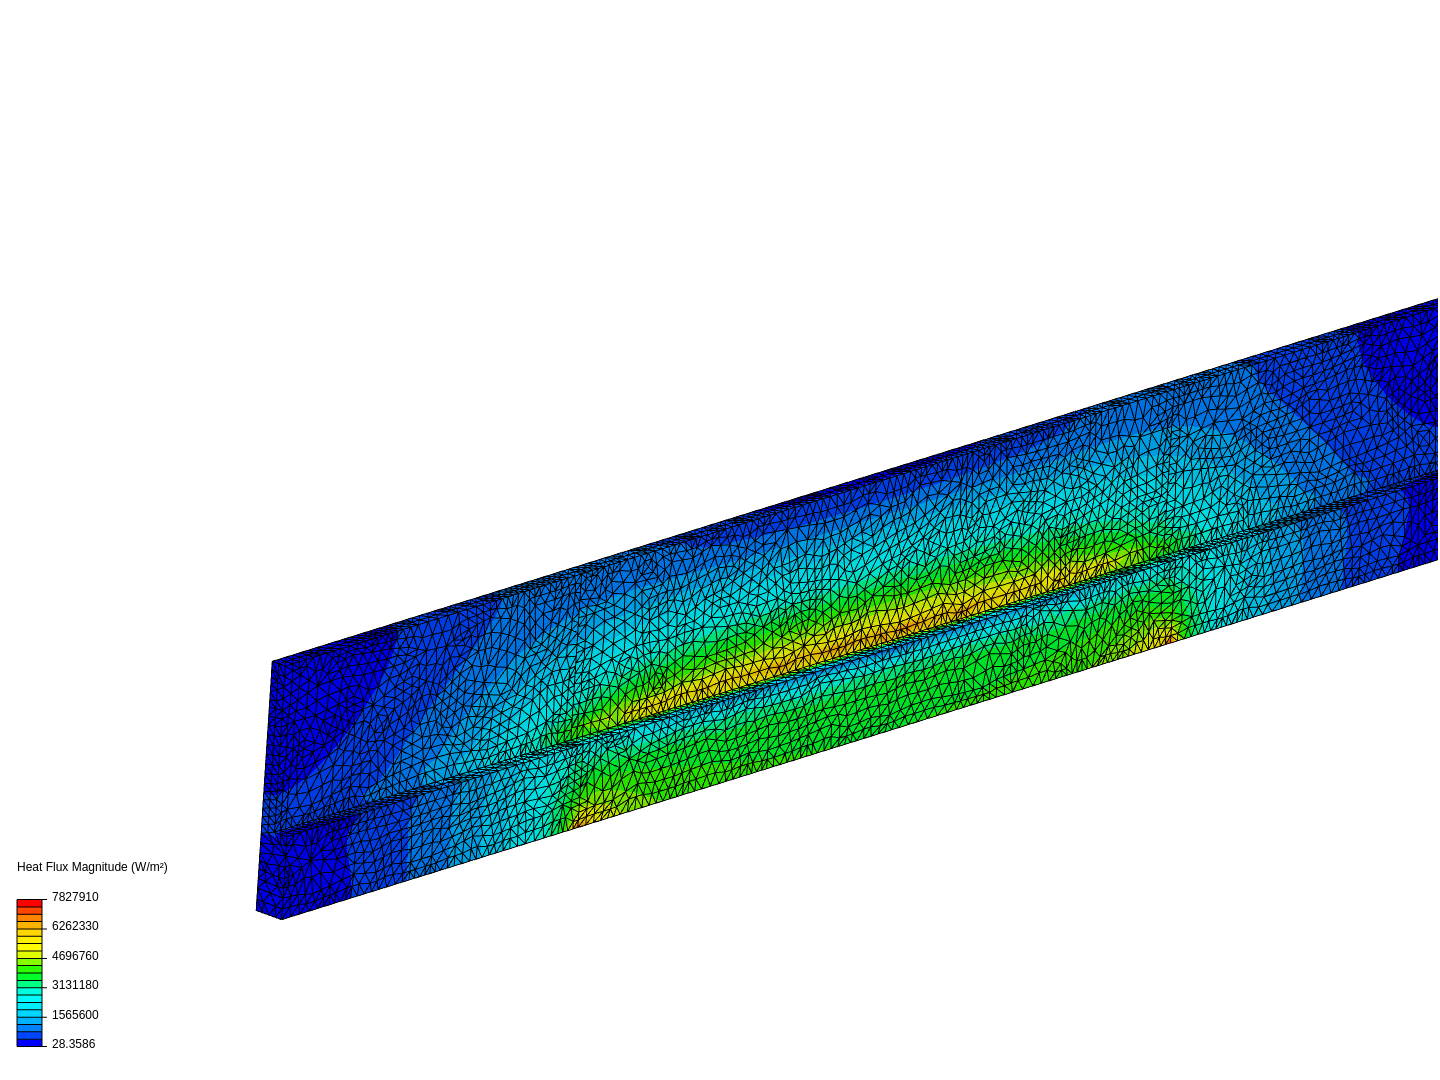 Microchannel Cooling image